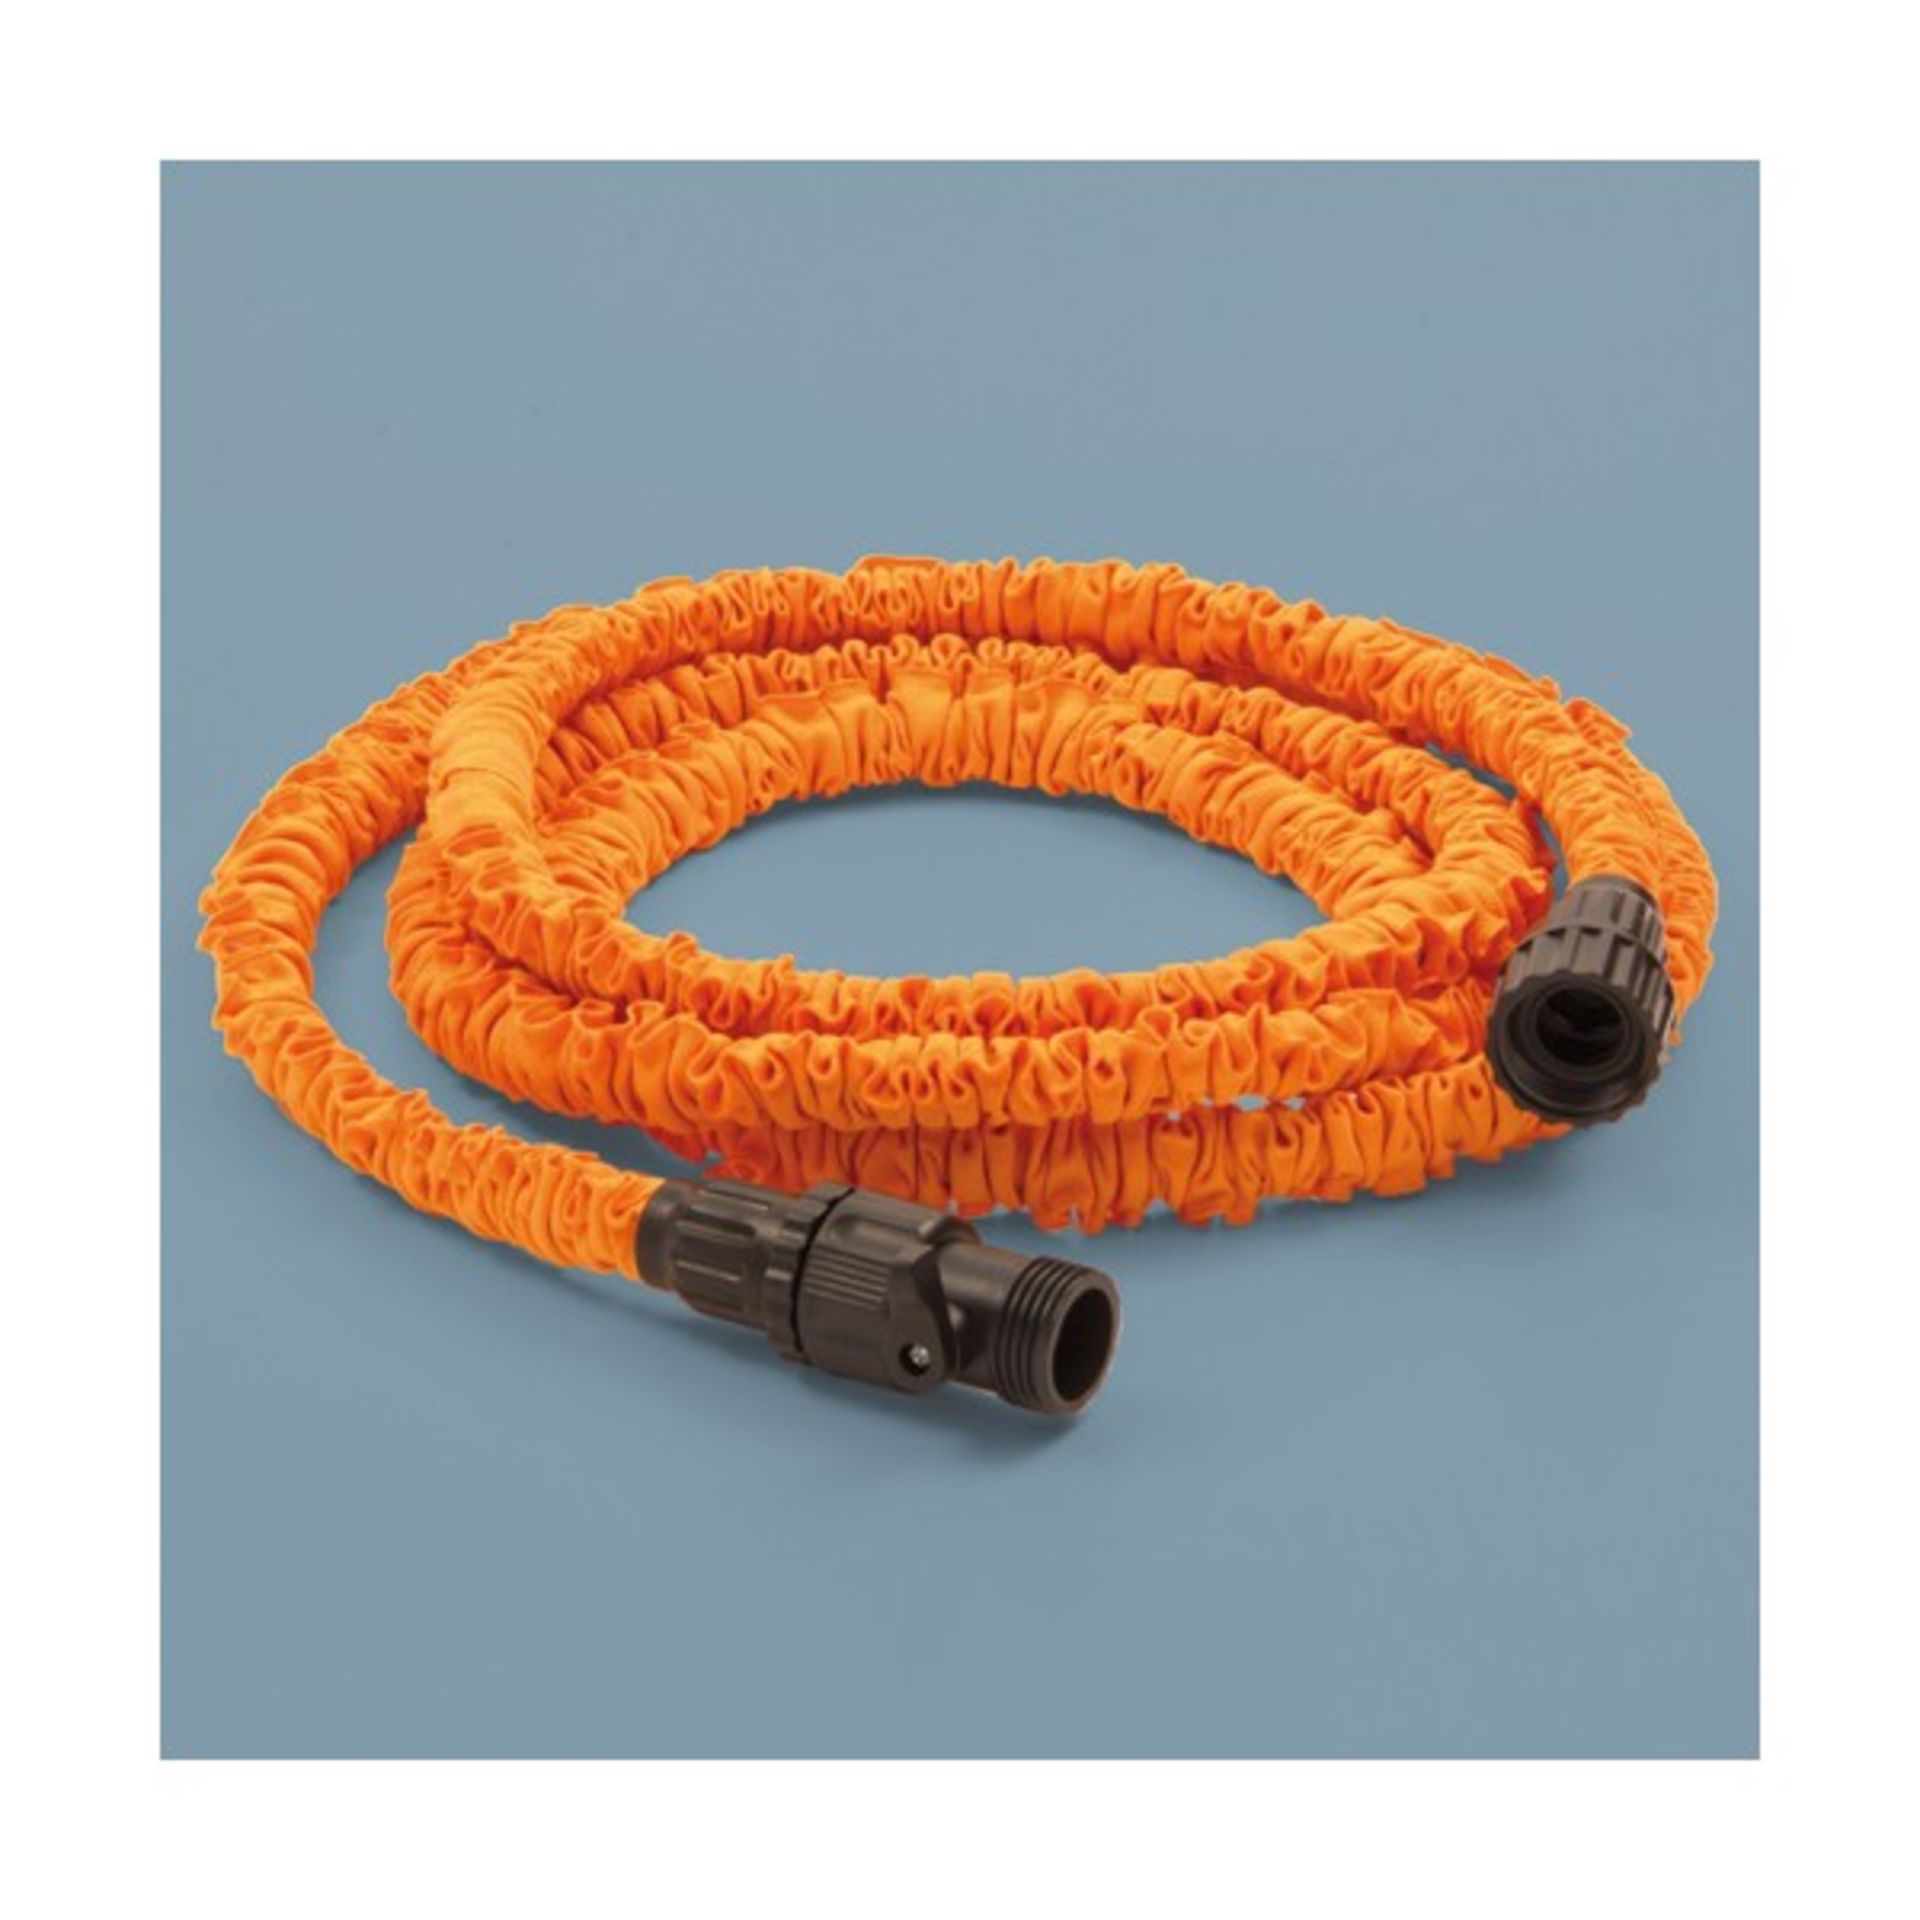 V Brand New 25ft Extendable Hose ISP £19.99 Argos similar X 2 YOUR BID PRICE TO BE MULTIPLIED BY